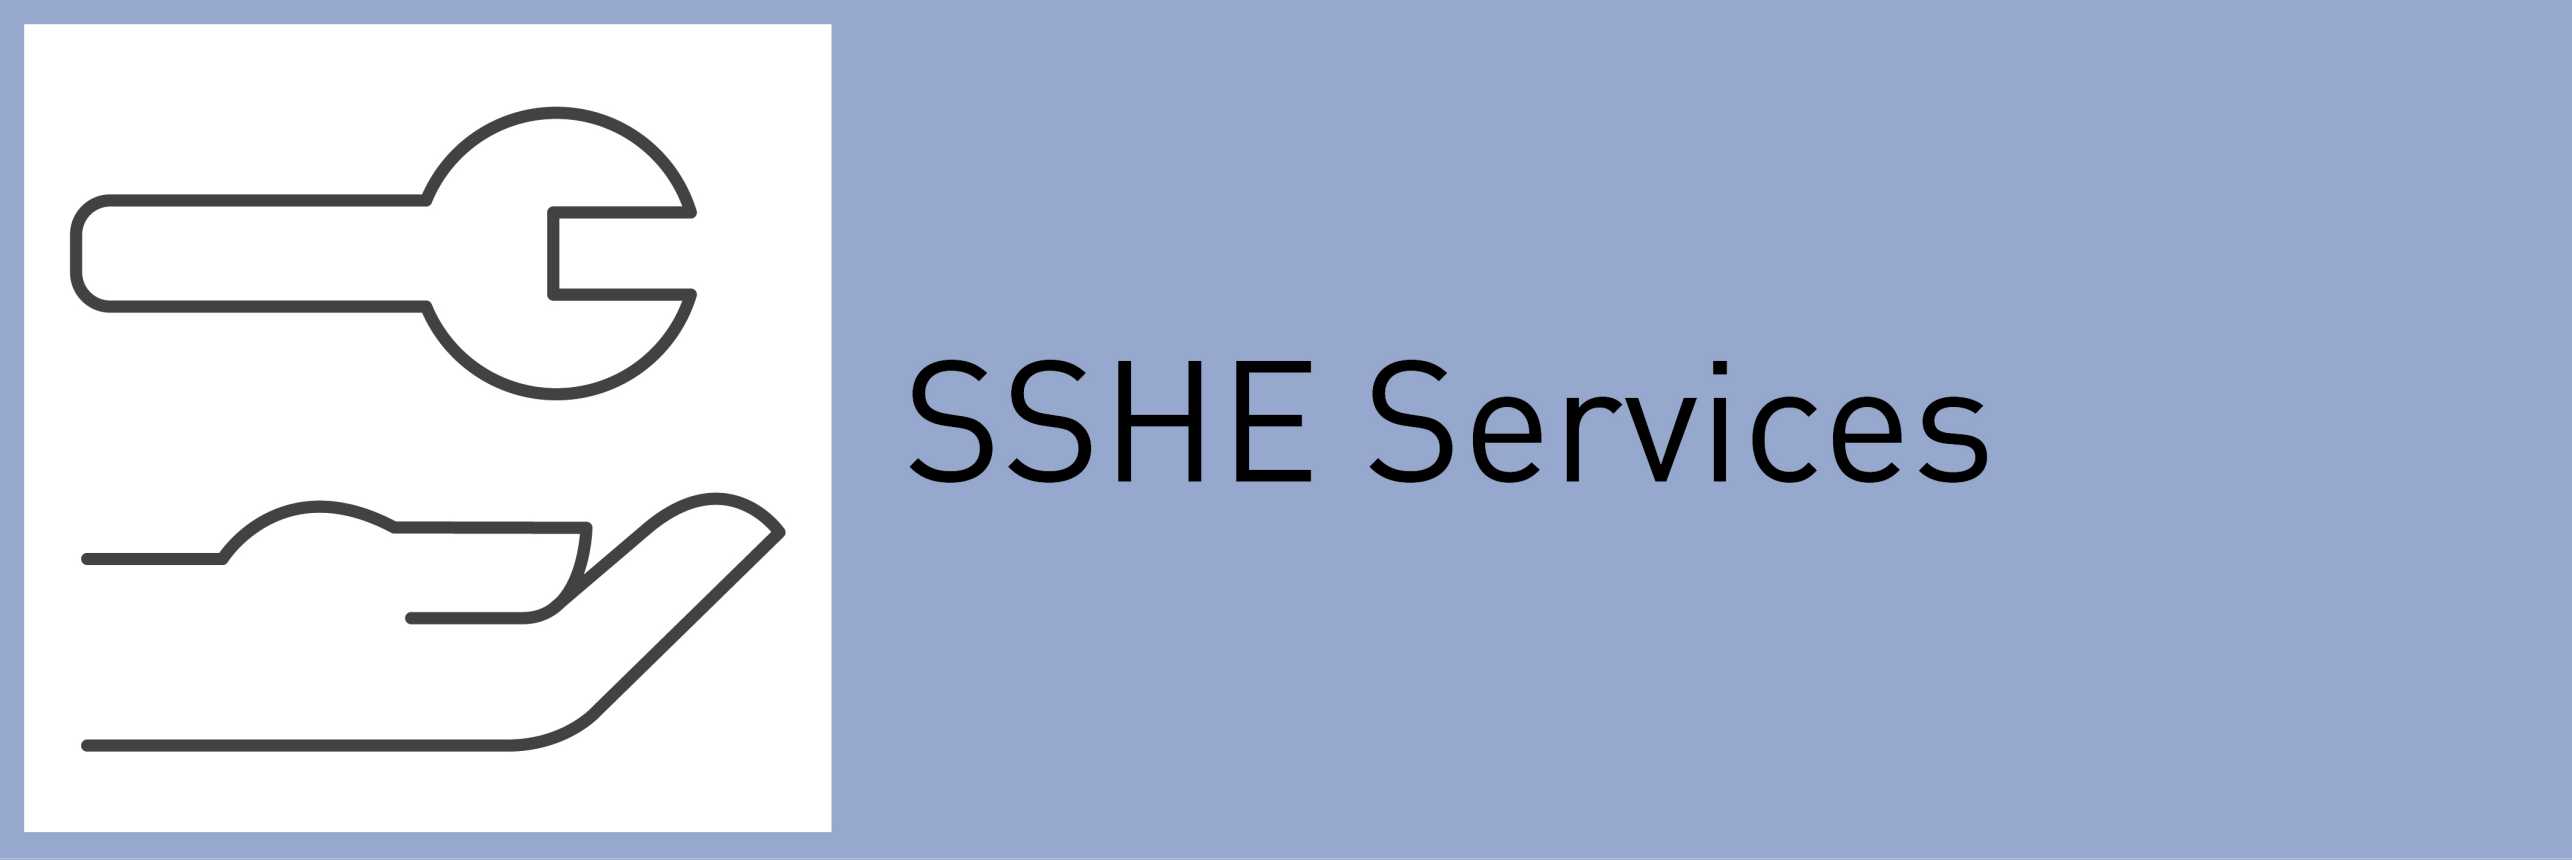 Link to the subpage about SSHE Services